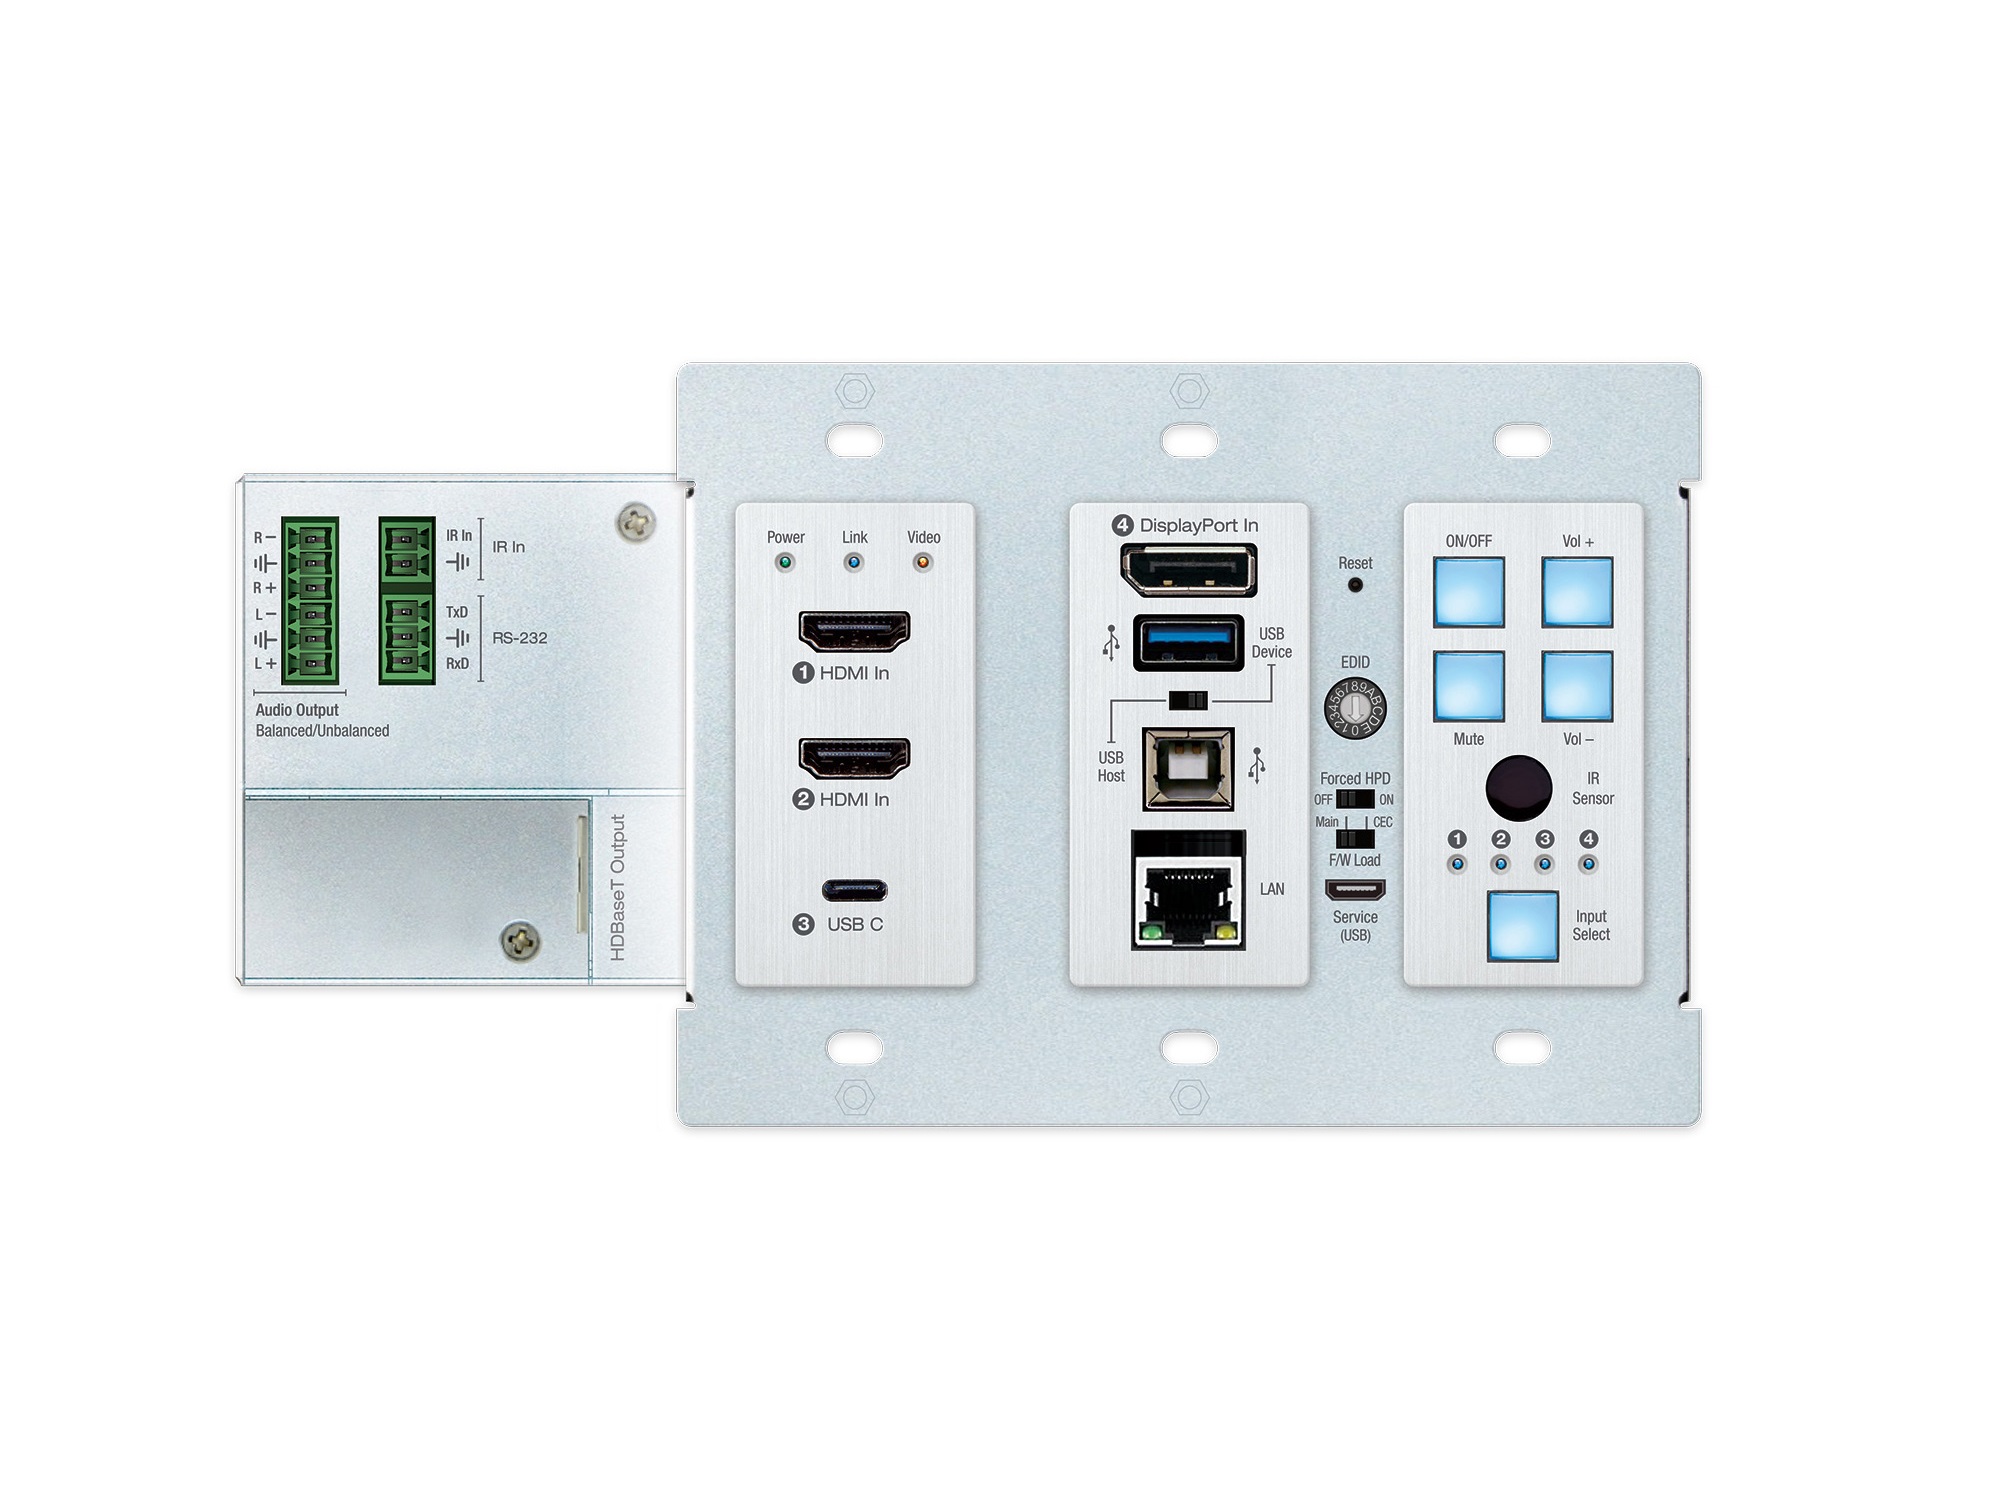 KD-X4x1WUTx 4x1 4K/18G 2xHDMI/DP/USB-C HDBT Wall Plate Switcher/Transmitter with CEC/ARC/Audio/IR/RS-232/PoH by Key Digital